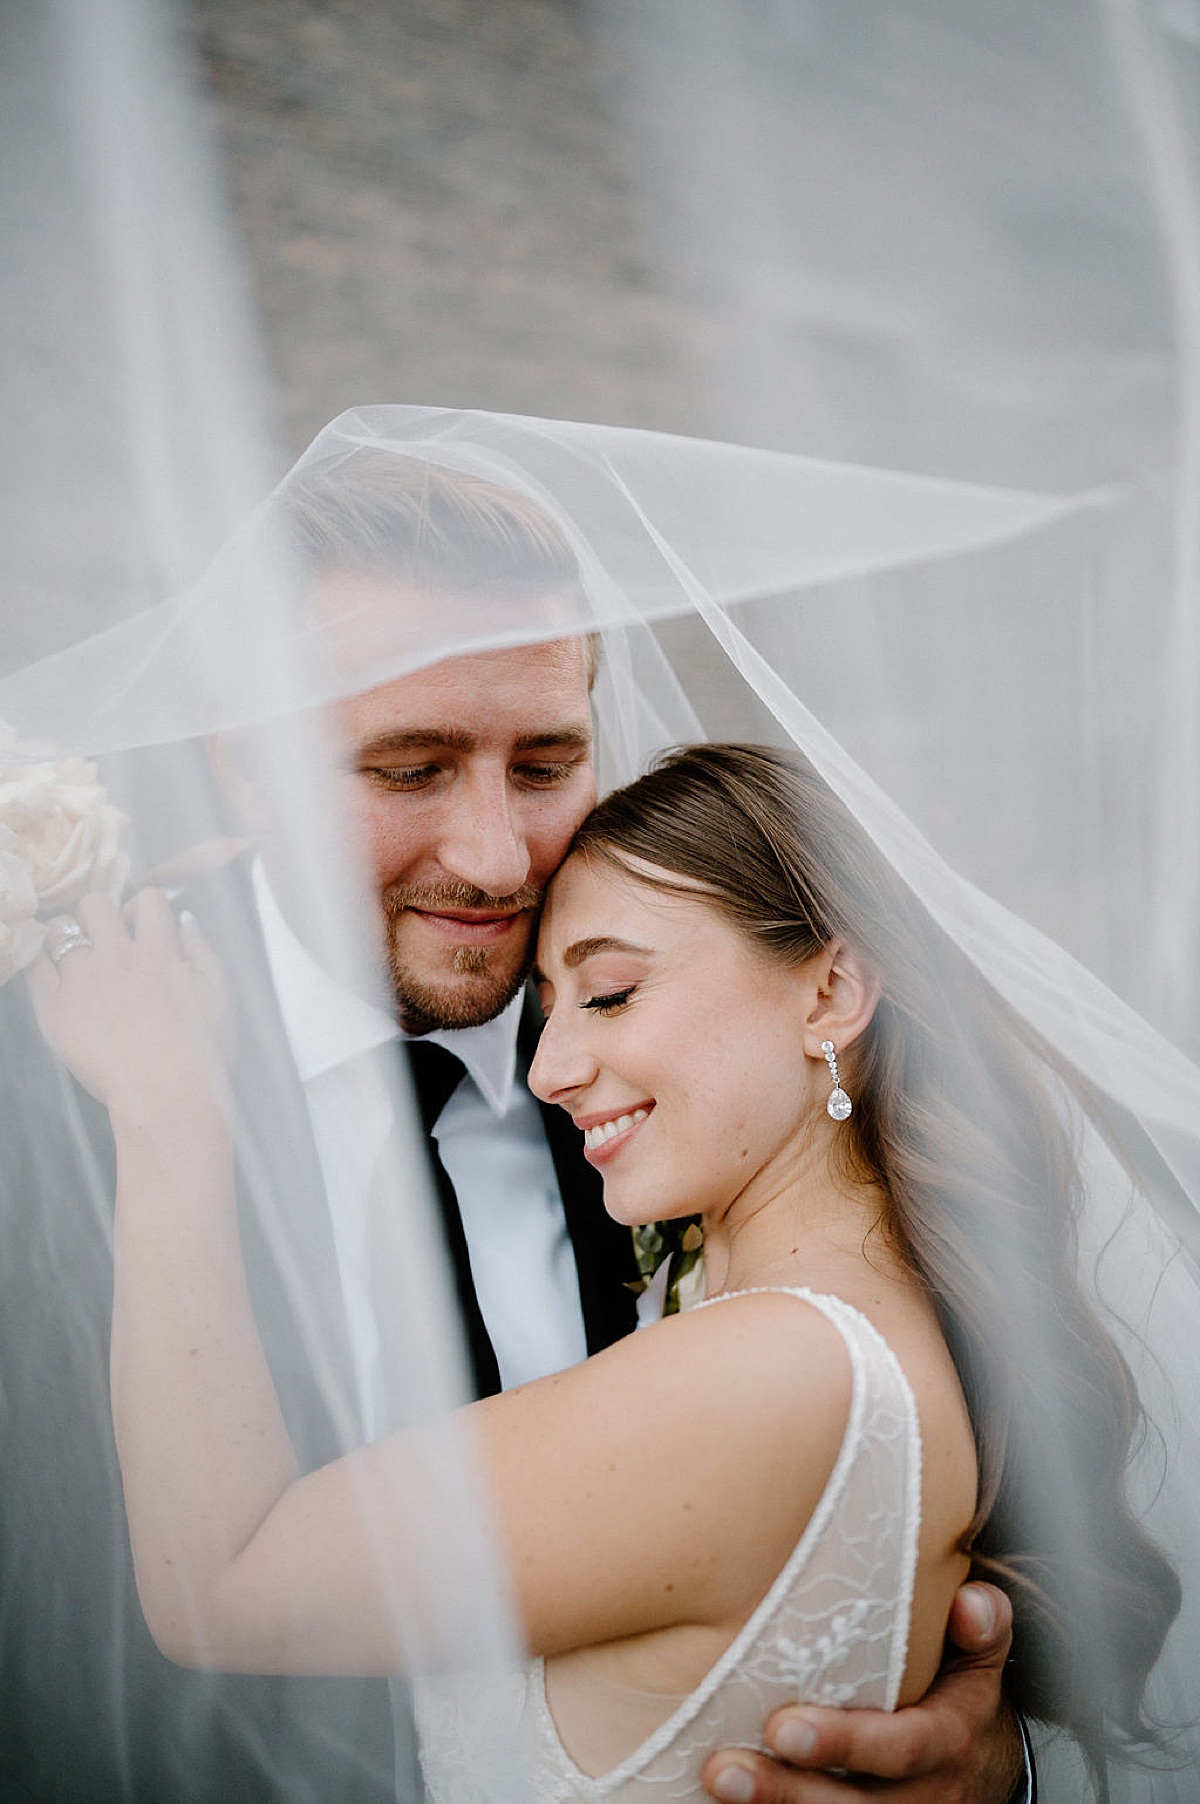 bride and groom embrace under wedding veil during shoot by midwest wedding photographer